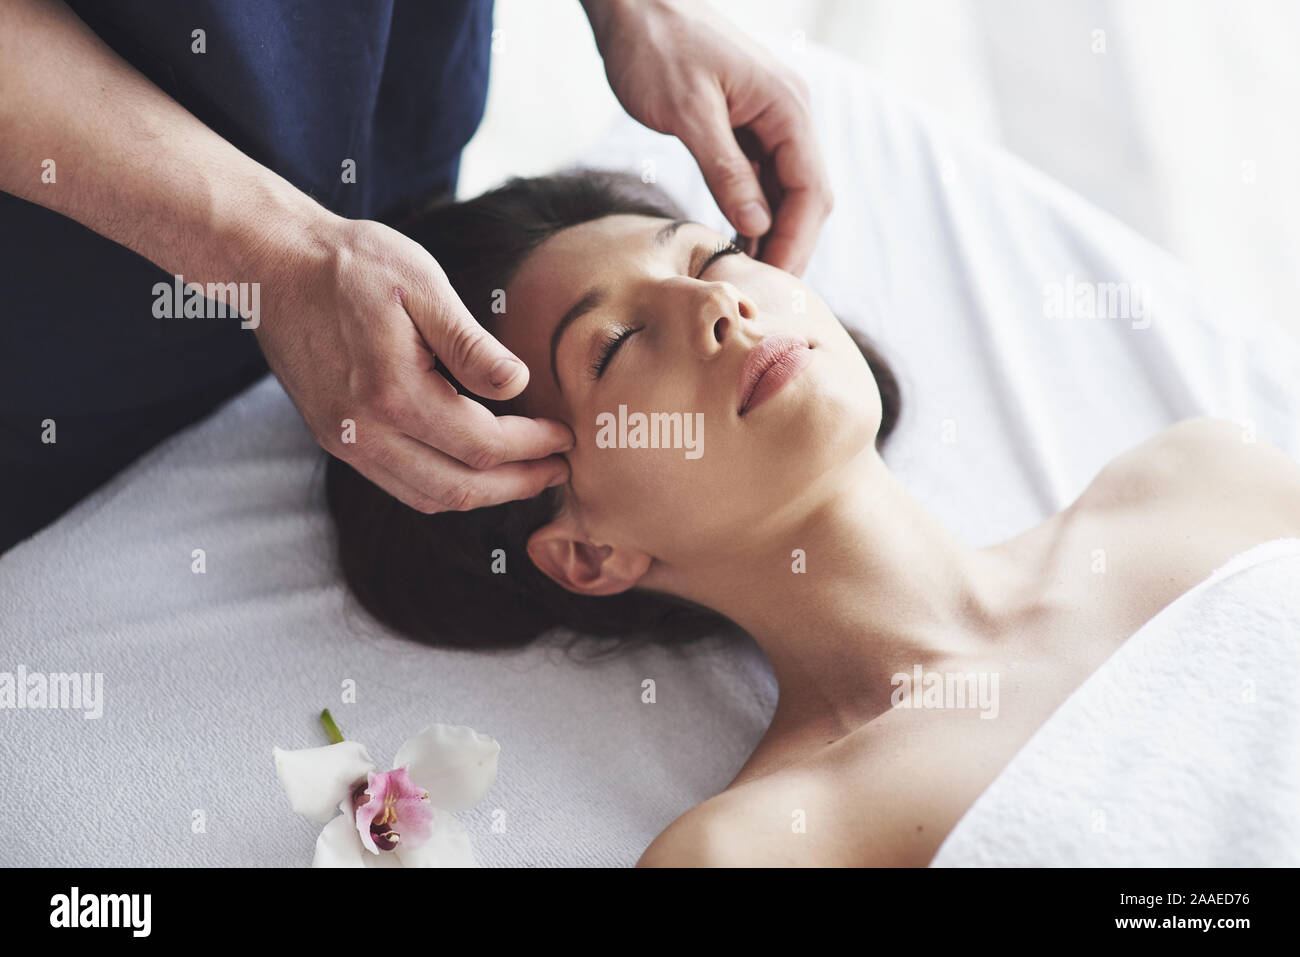 Traditional oriental massage therapy and beauty treatments. Stock Photo